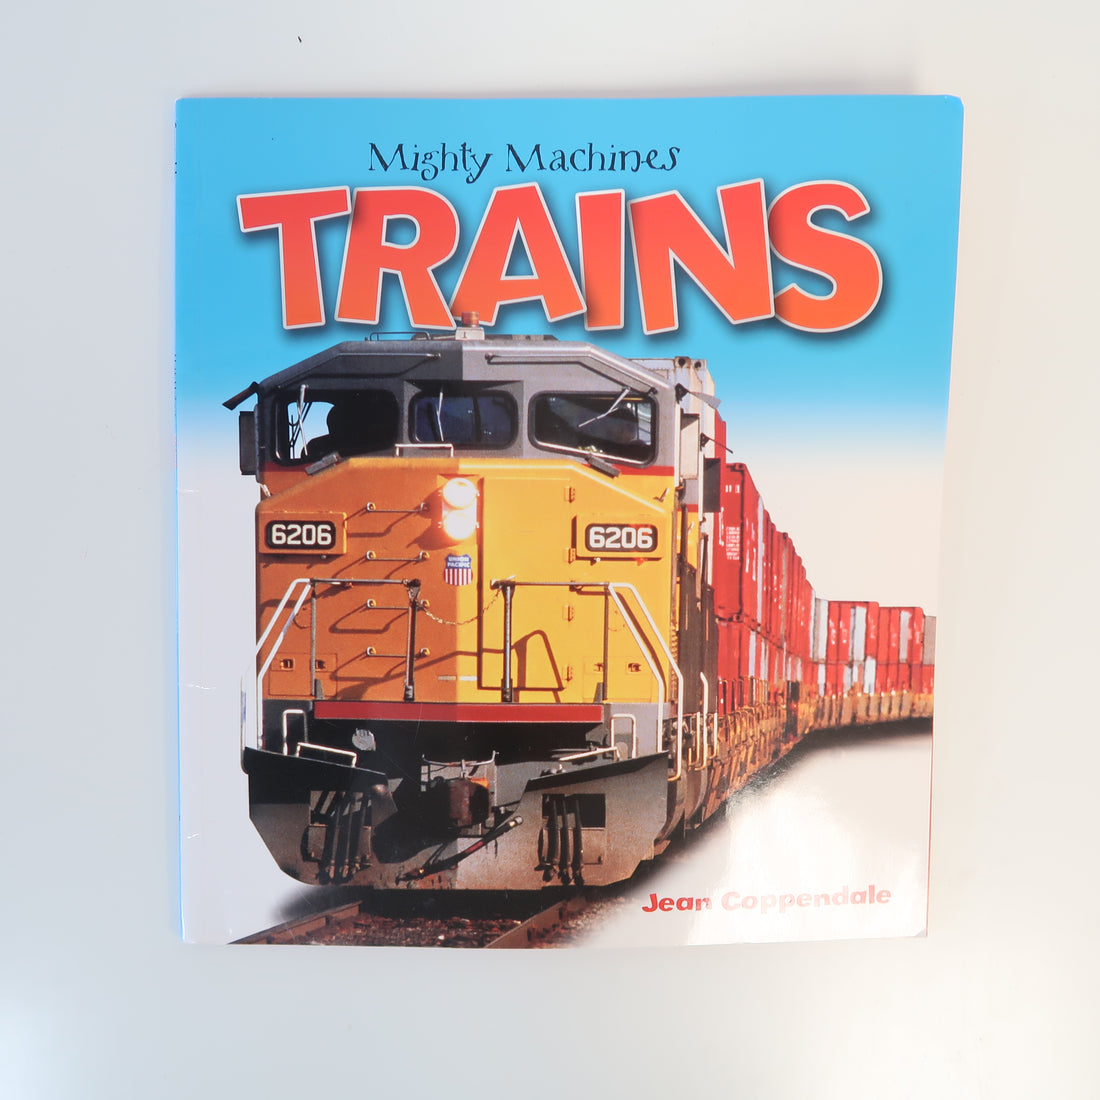 Mighty Machines - Trains